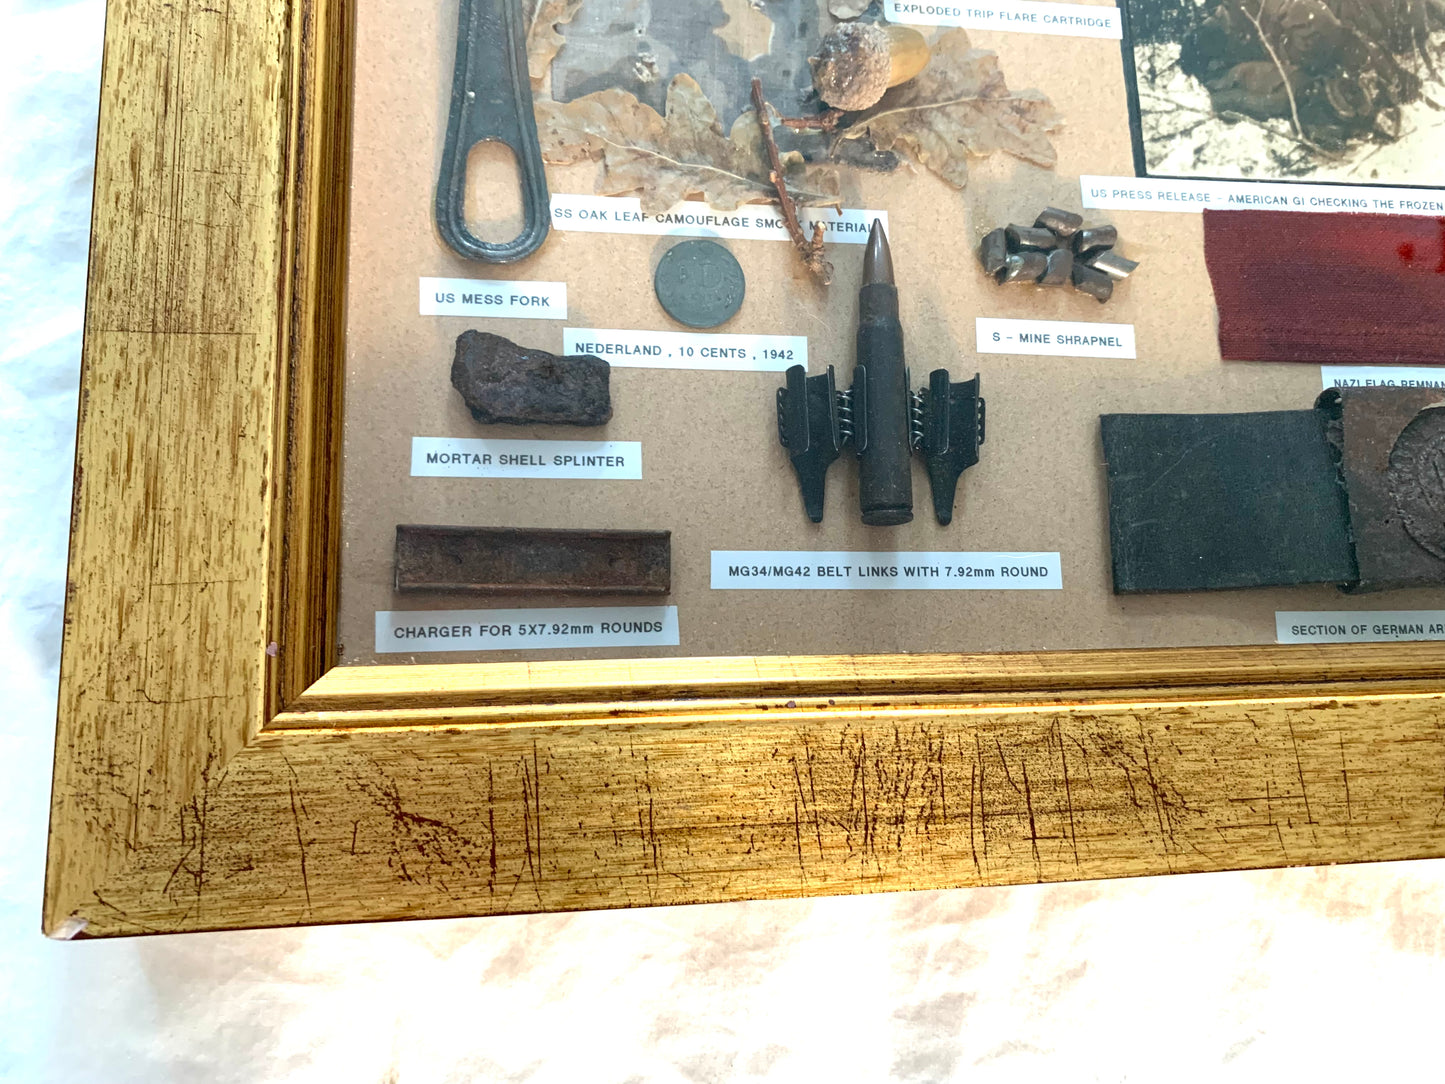 Battle of the Bulge Original Framed Items found in the Ardennes.